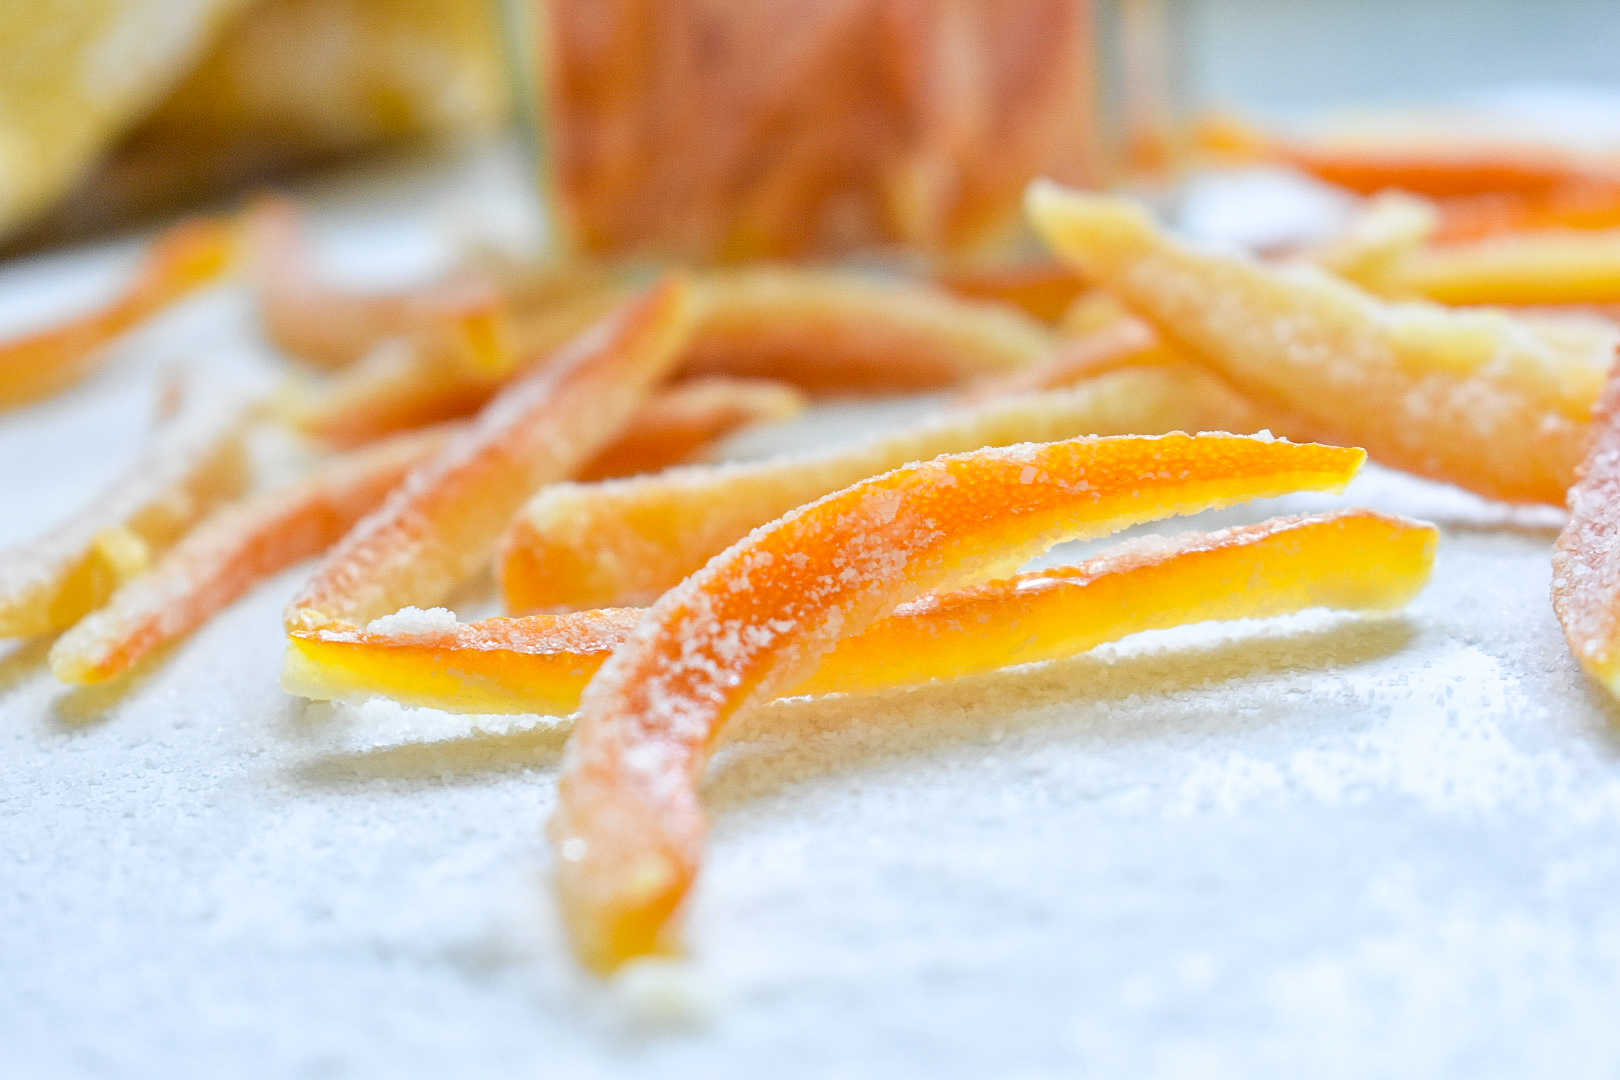 candied orange peels on a white surface